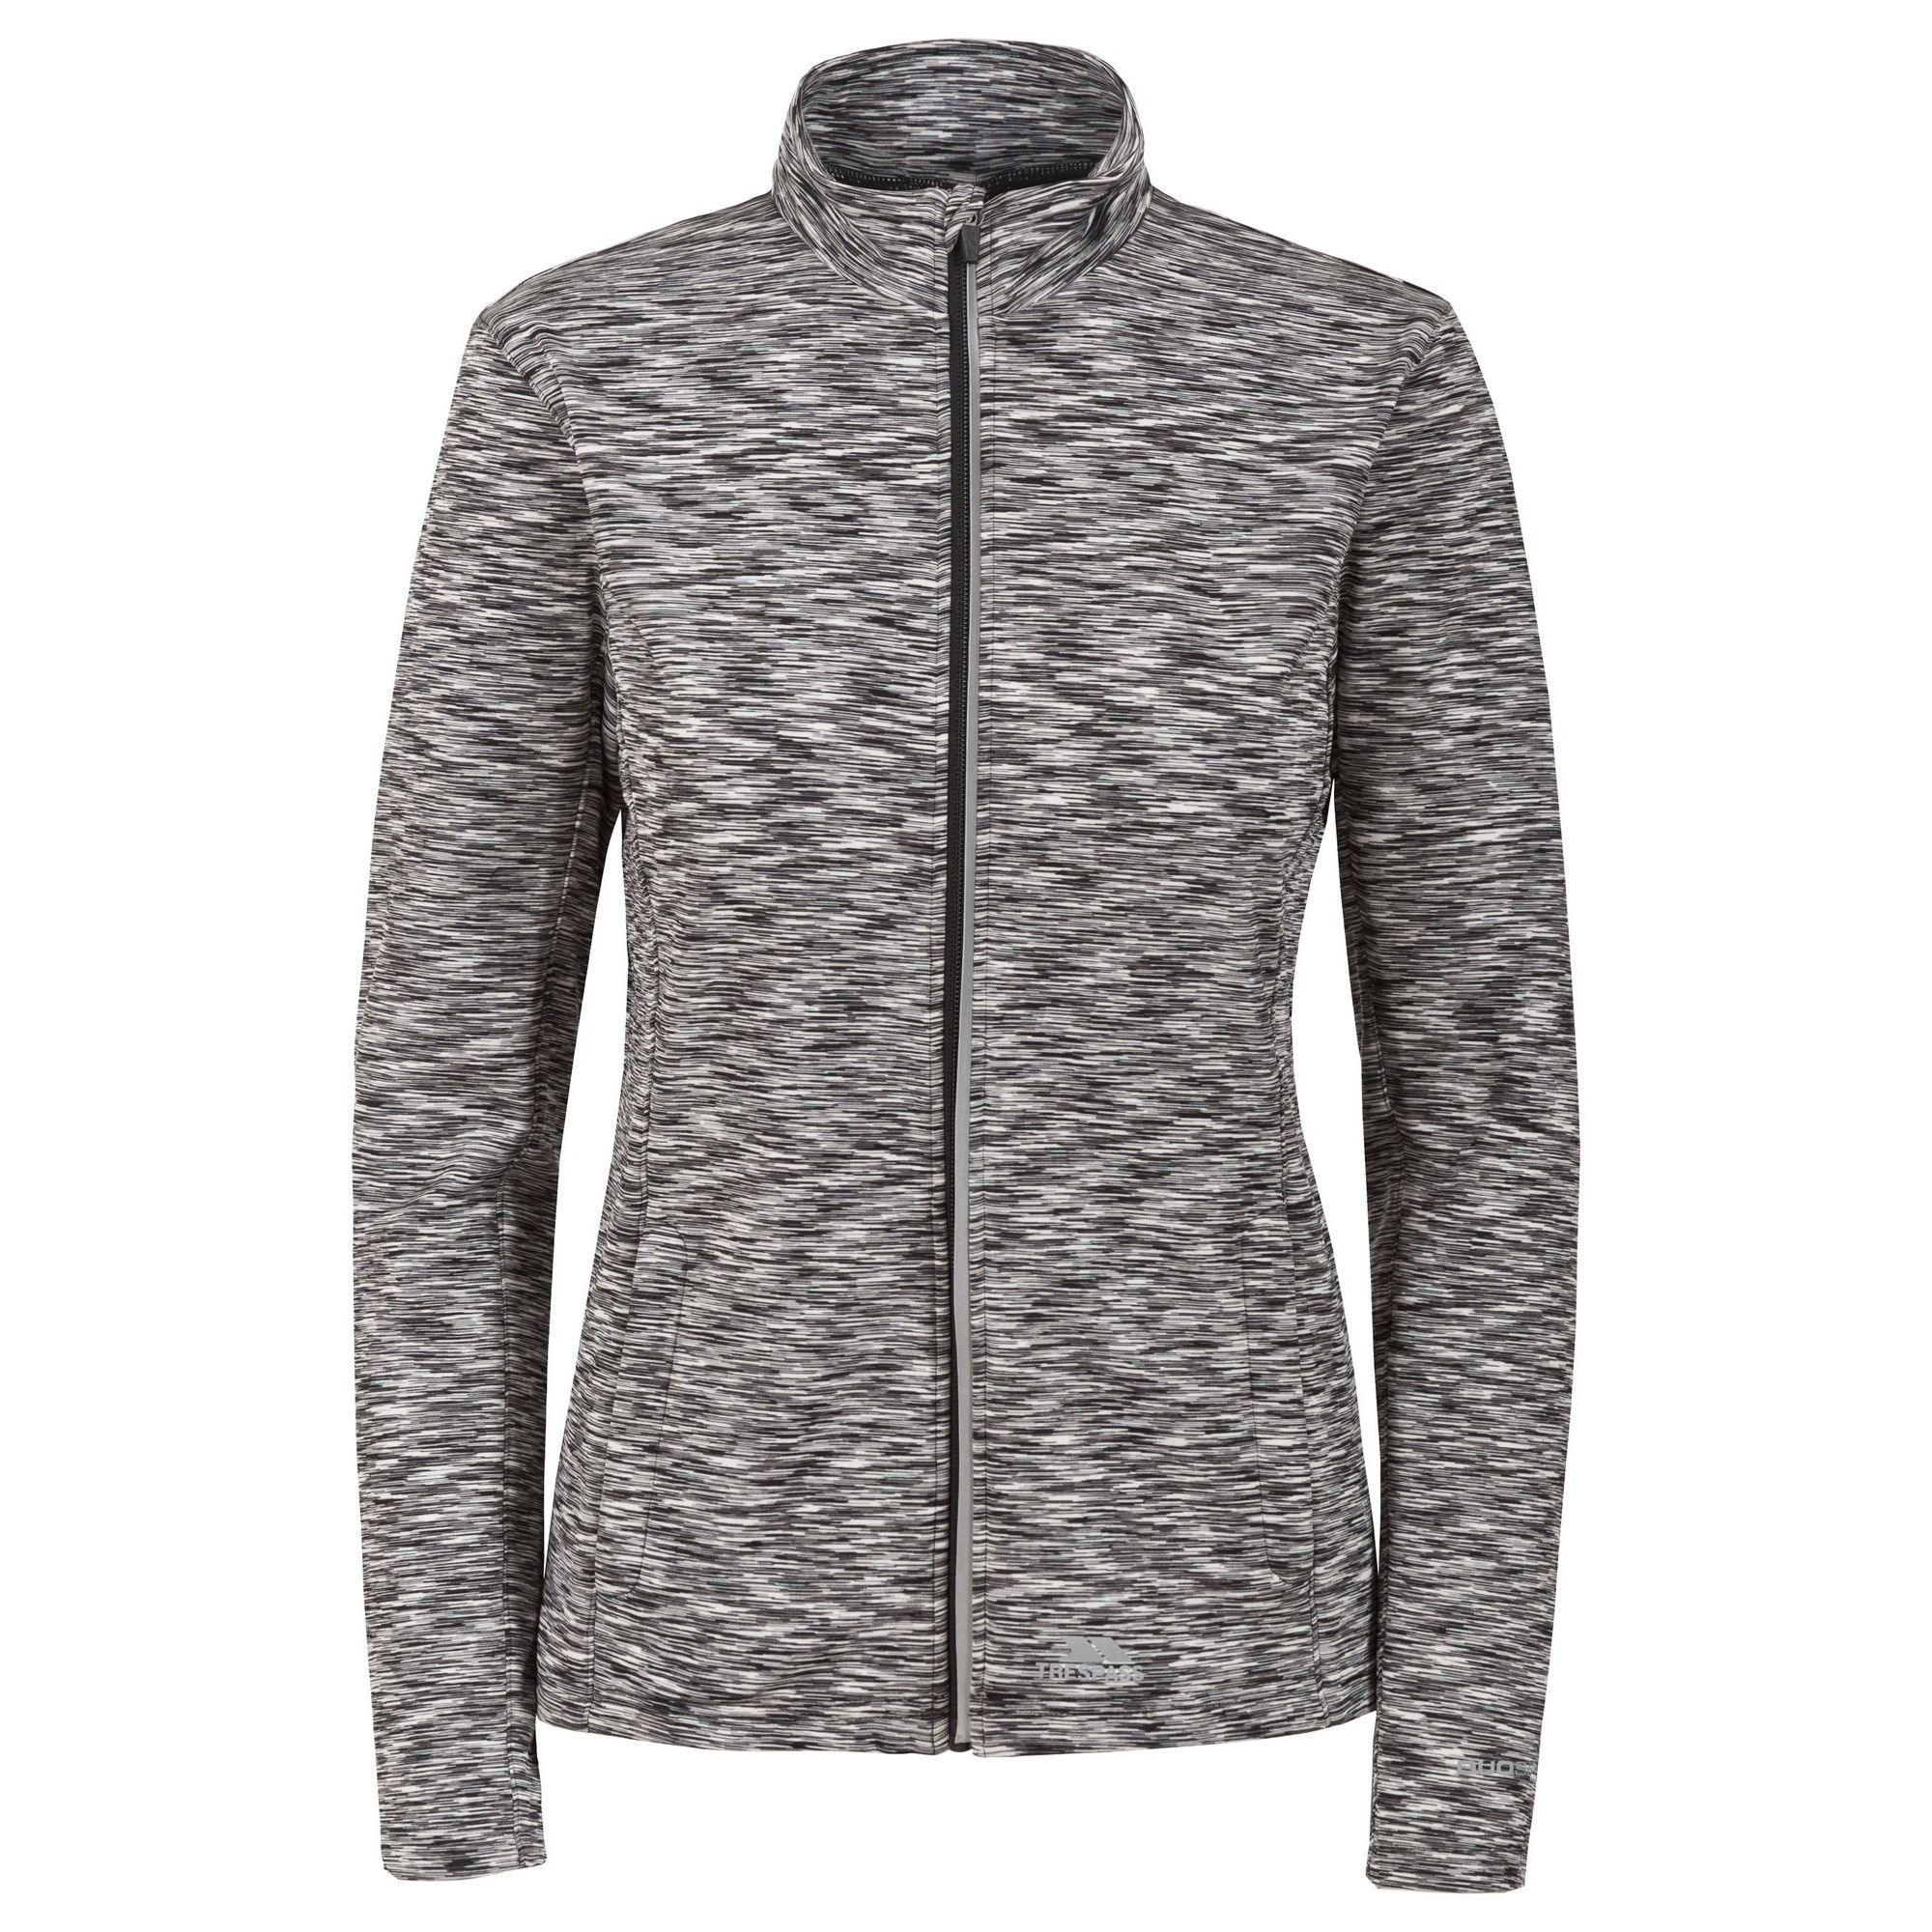 Long sleeved top with full front zip and 2 zip pockets. Contrast panels. Reflective printed logos. Brushed backed fabric.  finish. Wicking. Quick dry. 88% polyester, 12% elastane. Trespass Womens Chest Sizing (approx): XS/8 - 32in/81cm, S/10 - 34in/86cm, M/12 - 36in/91.4cm, L/14 - 38in/96.5cm, XL/16 - 40in/101.5cm, XXL/18 - 42in/106.5cm.